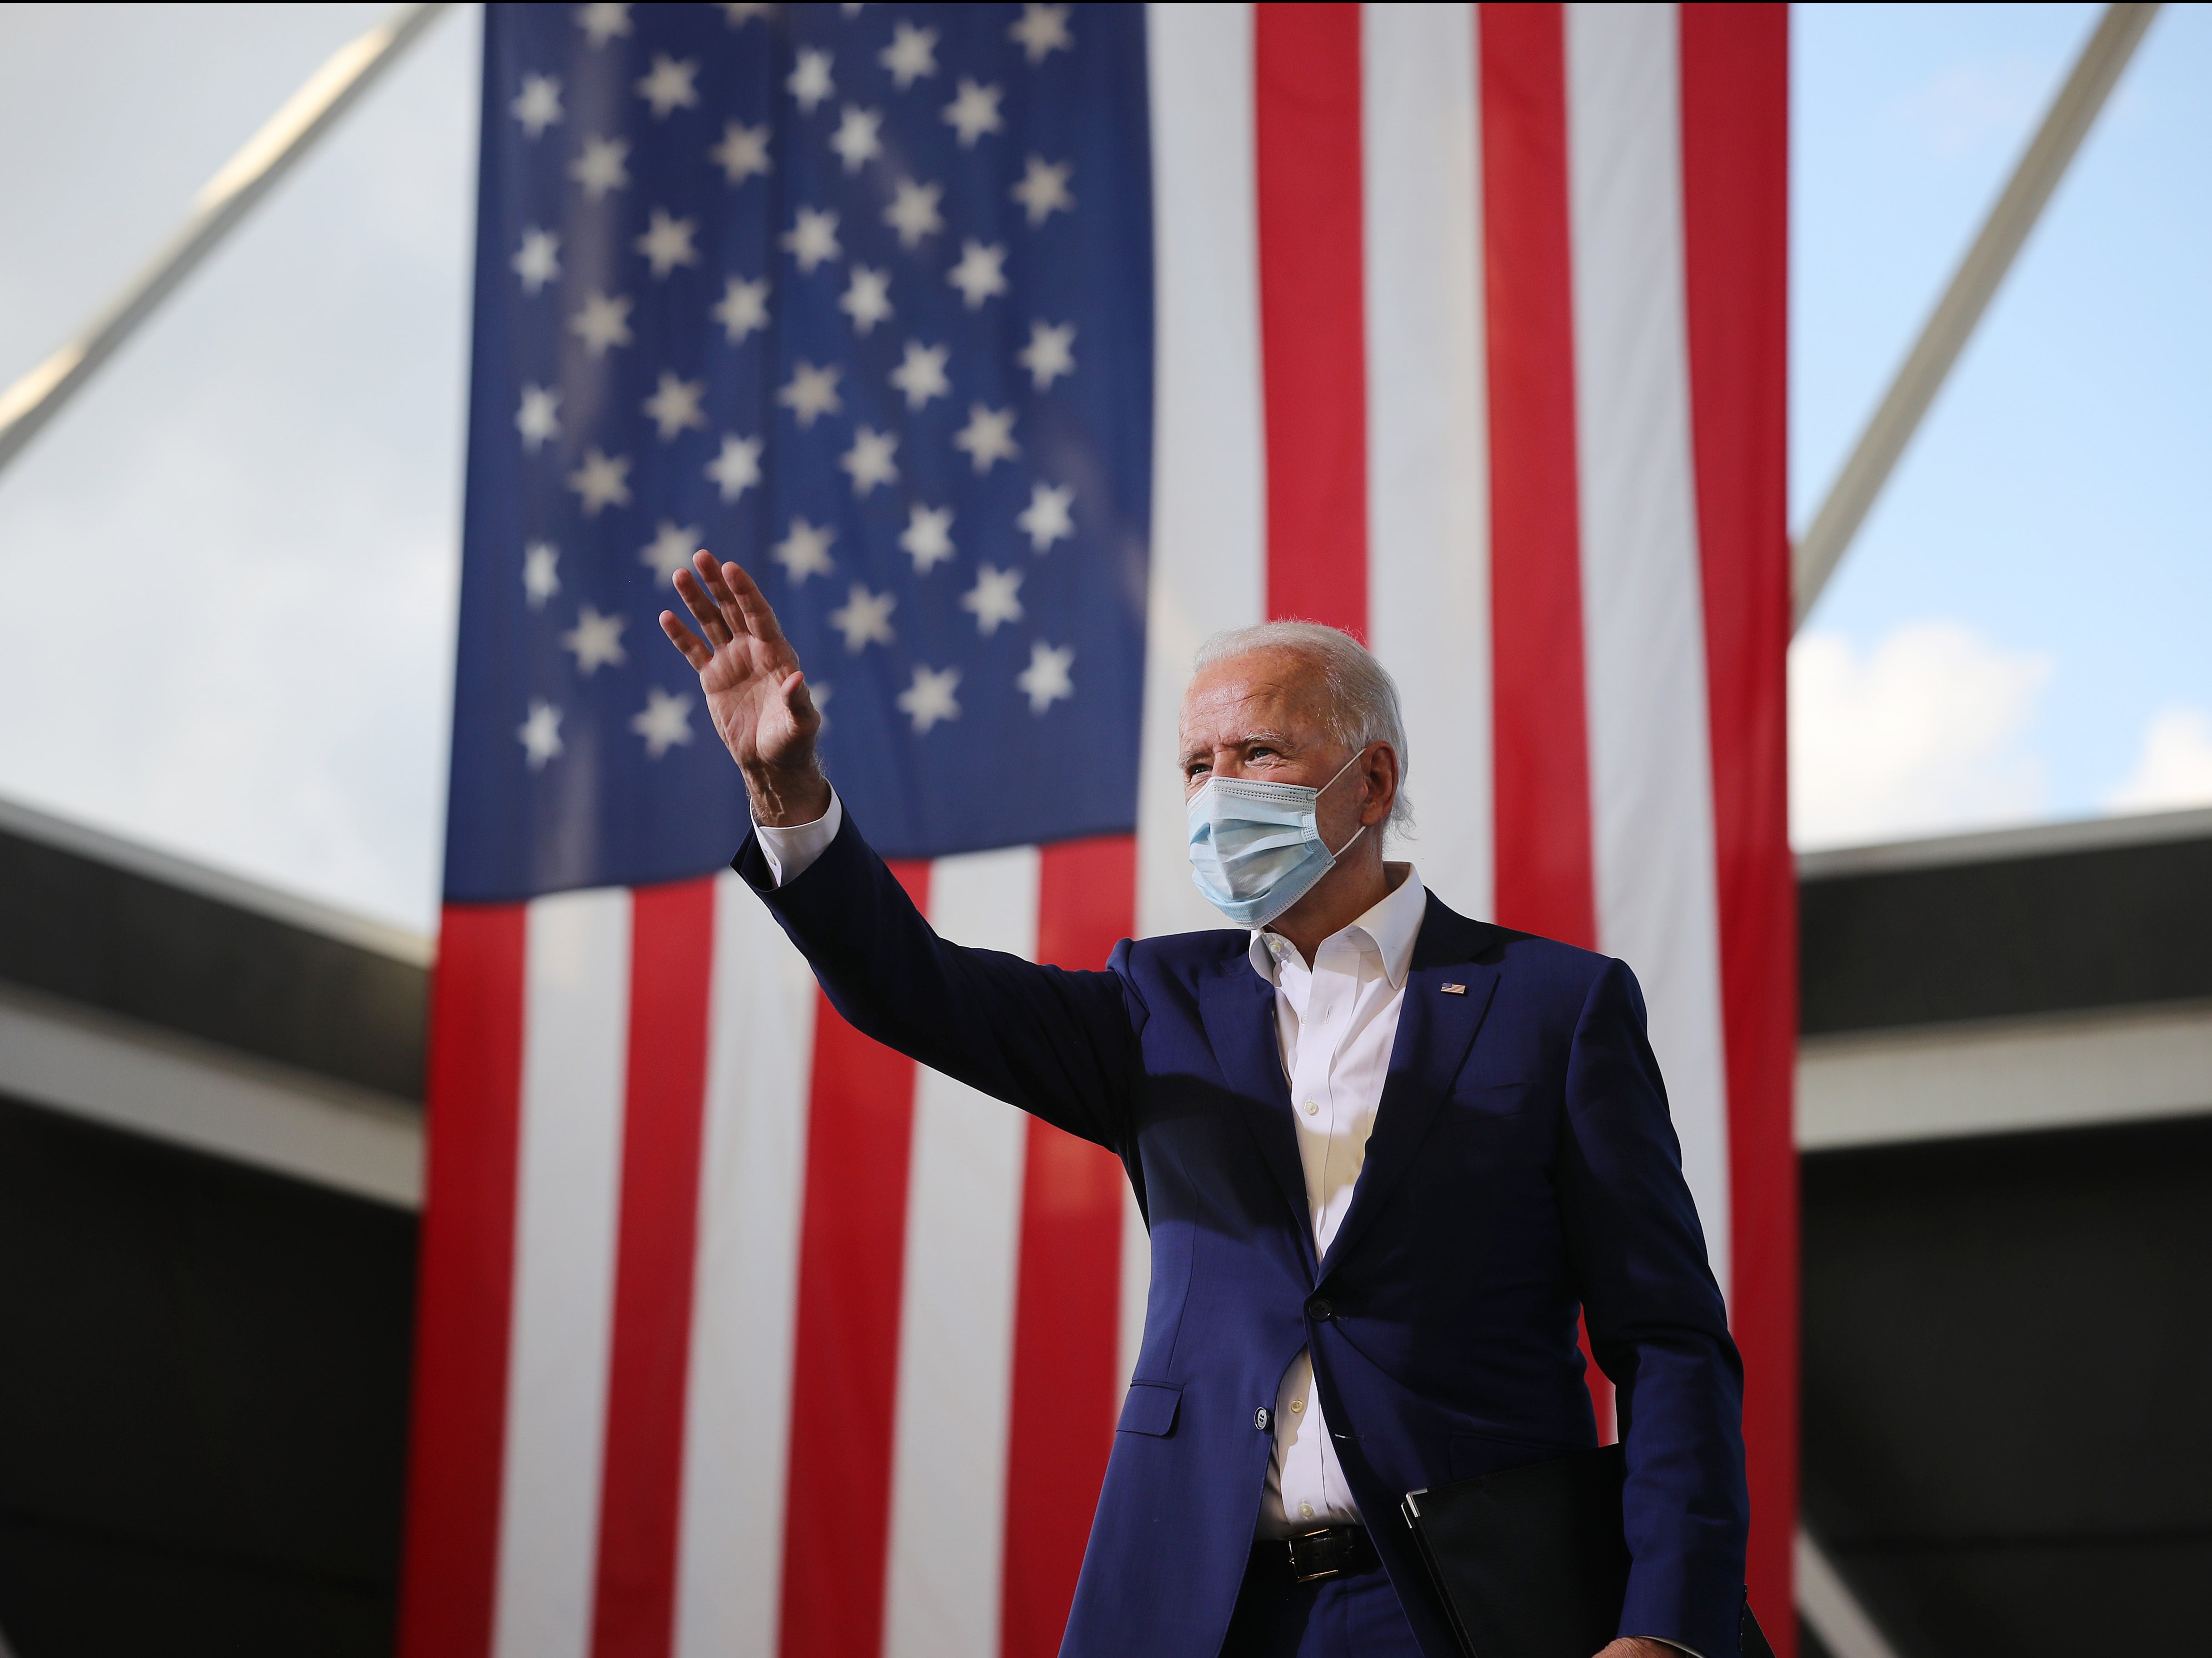 Biden waves to supporters during a drive-in voter mobilisation event at Miramar Regional Park, in Florida, on Tuesday